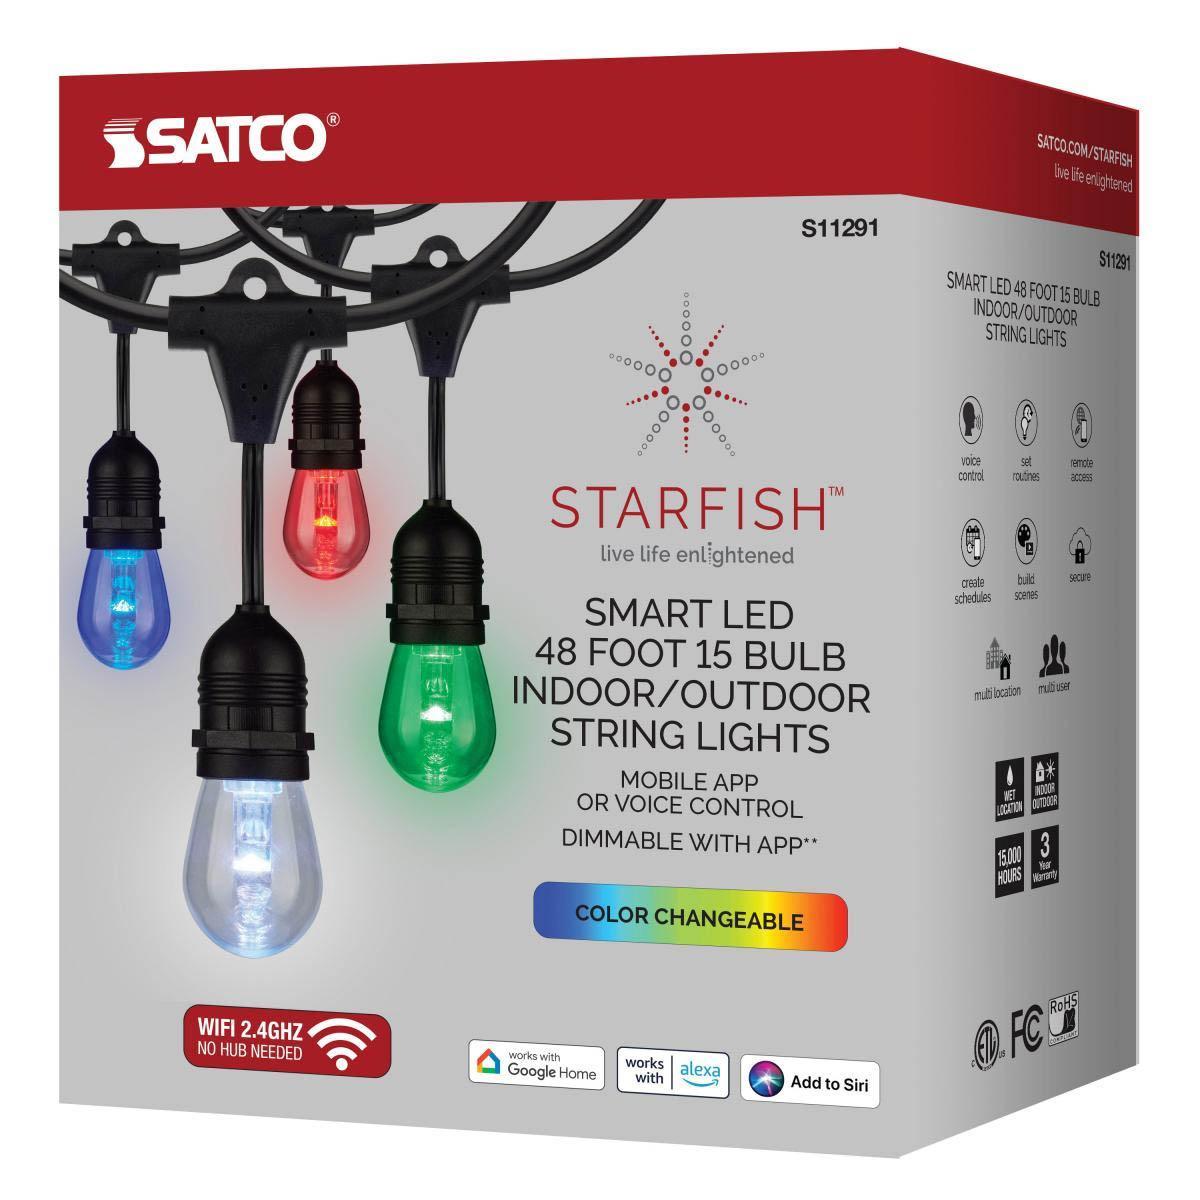 Starfish Wi Fi smart LED indoor/outdoor string light, Color changing RGB and Tunable White, 48 Feet, 15 Lights